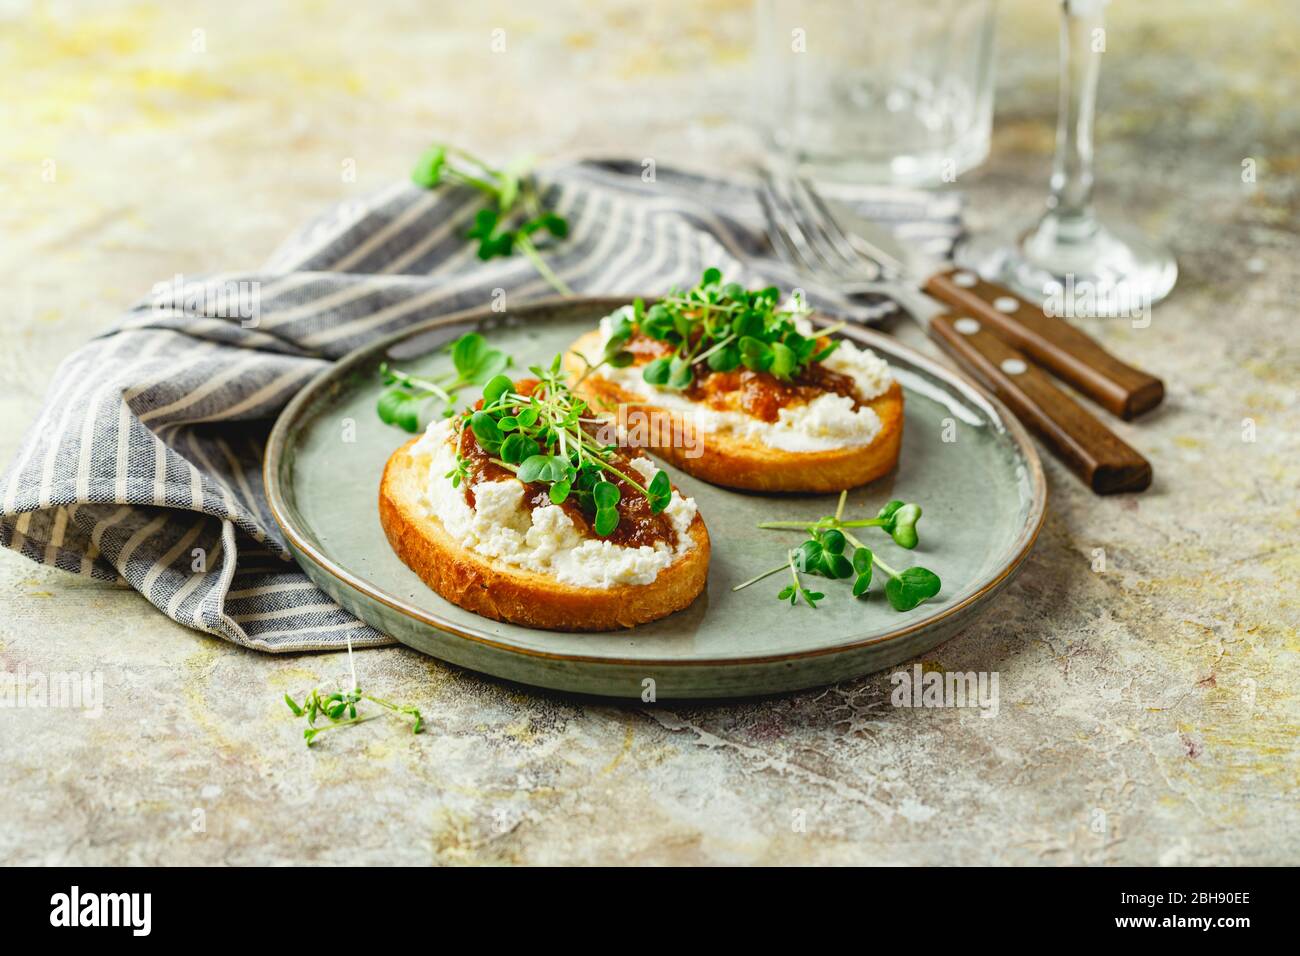 Canape or crostini with toasted baguette, cottage cheese, fig jam and microgreen on plate. Delicious breakfast, snack, appetizers Stock Photo